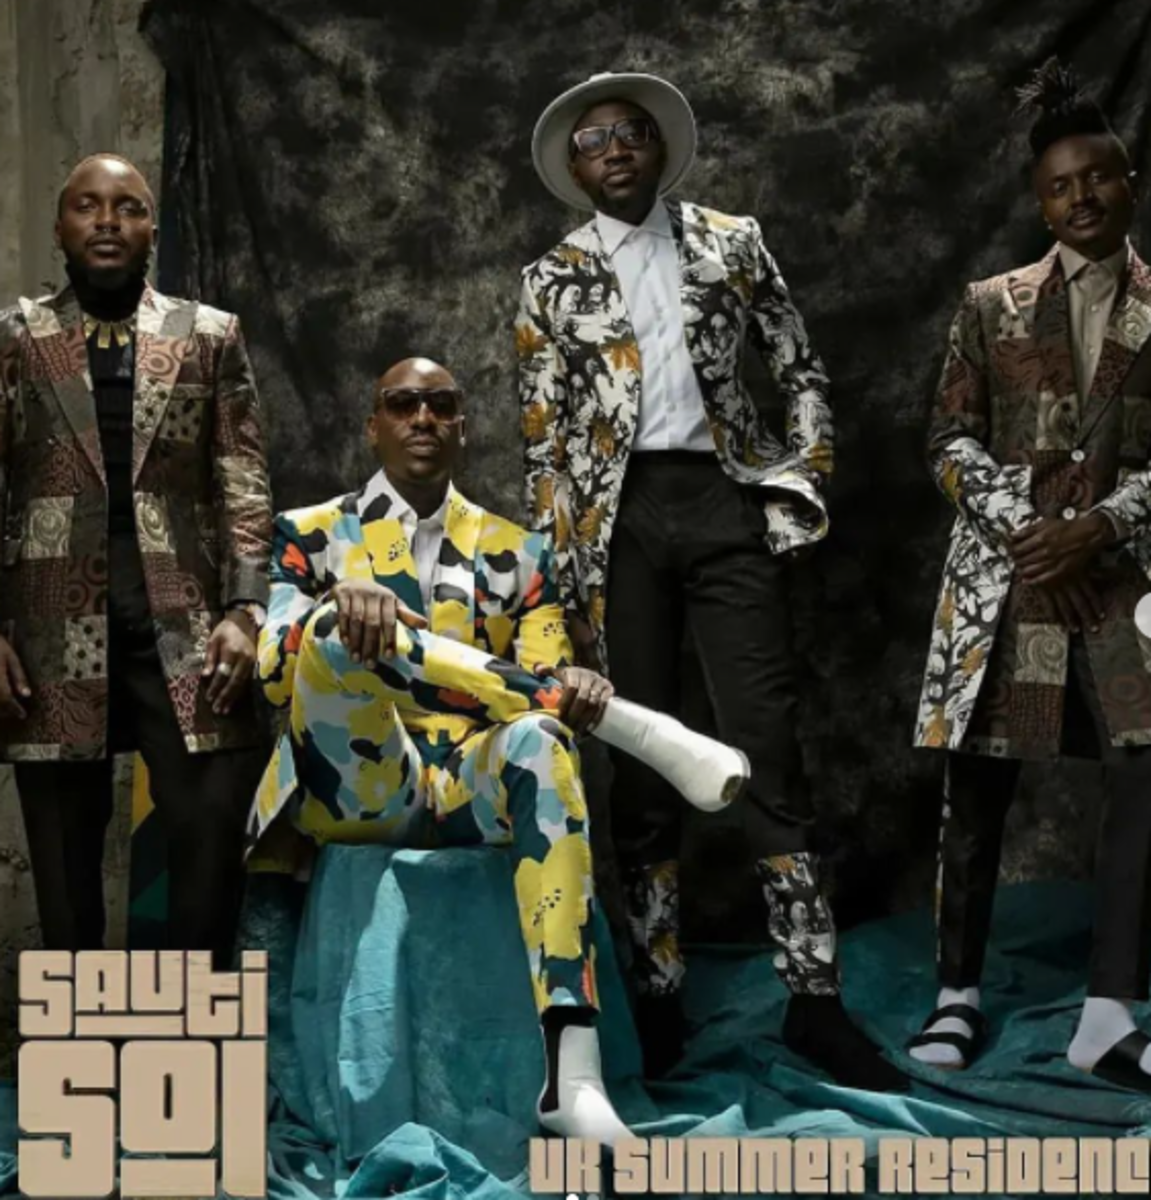 sauti-sol-the-most-successful-male-band-in-kenya